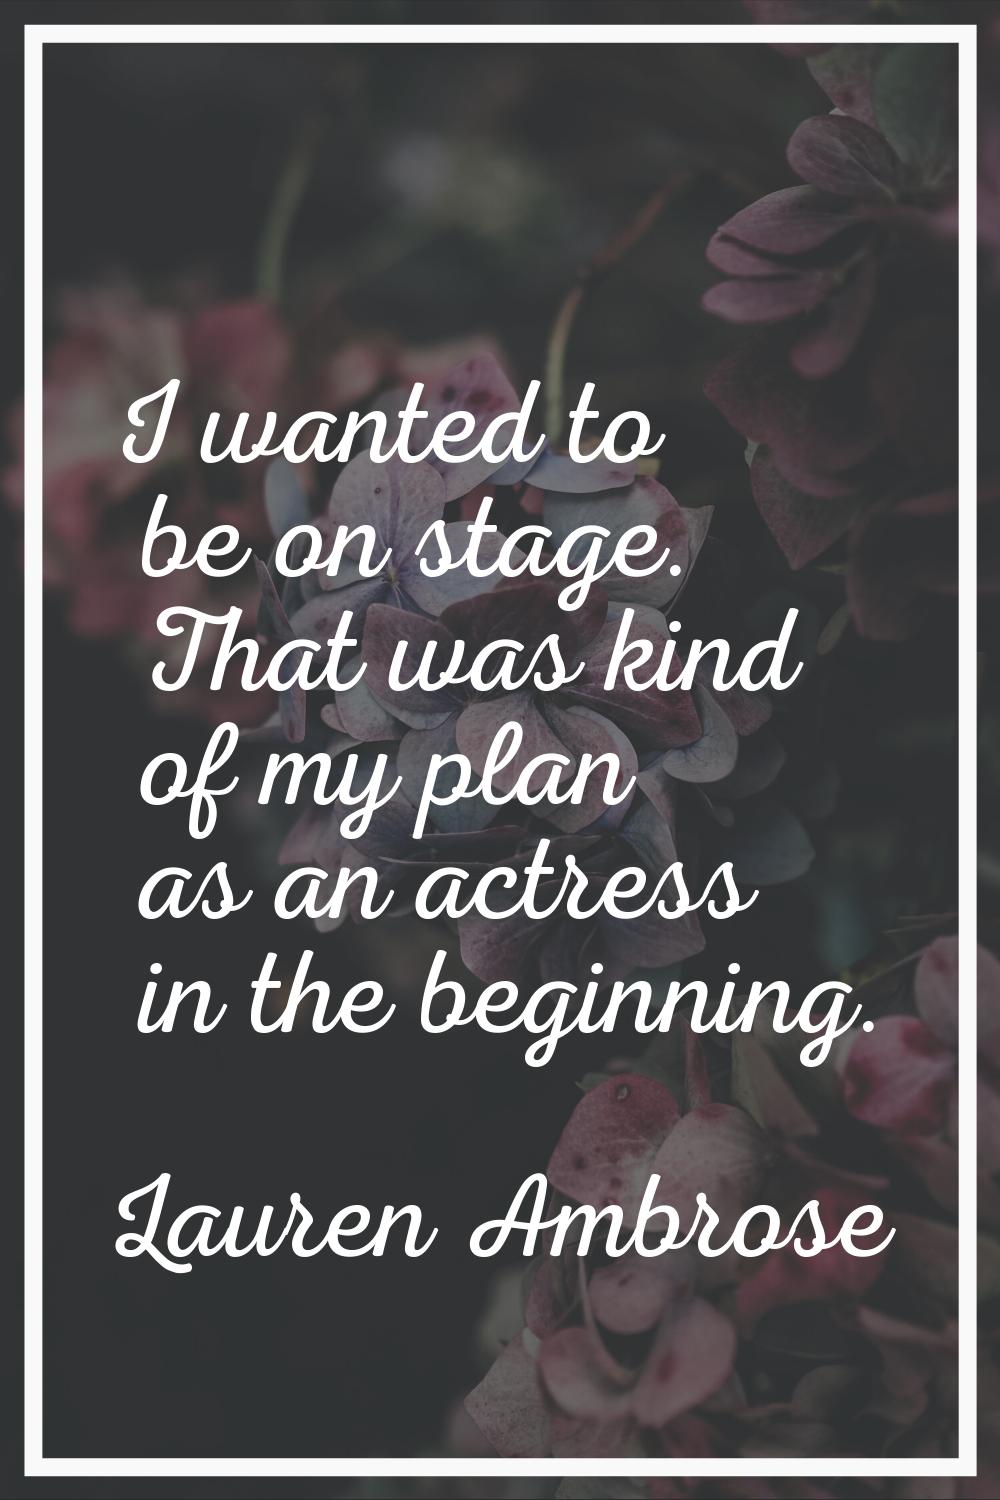 I wanted to be on stage. That was kind of my plan as an actress in the beginning.